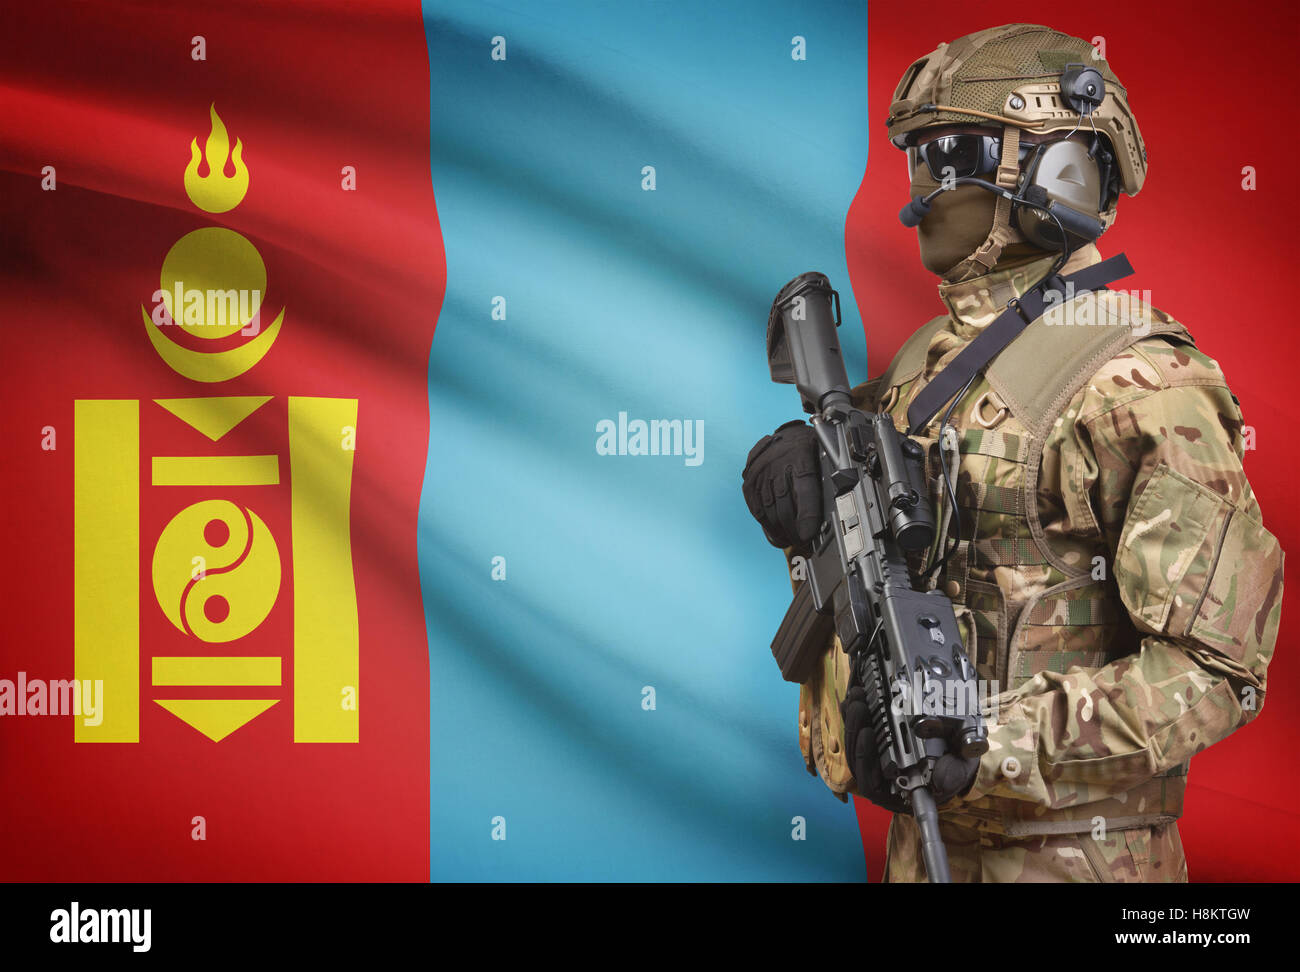 Soldier in helmet holding machine gun with national flag on background - Mongolia Stock Photo